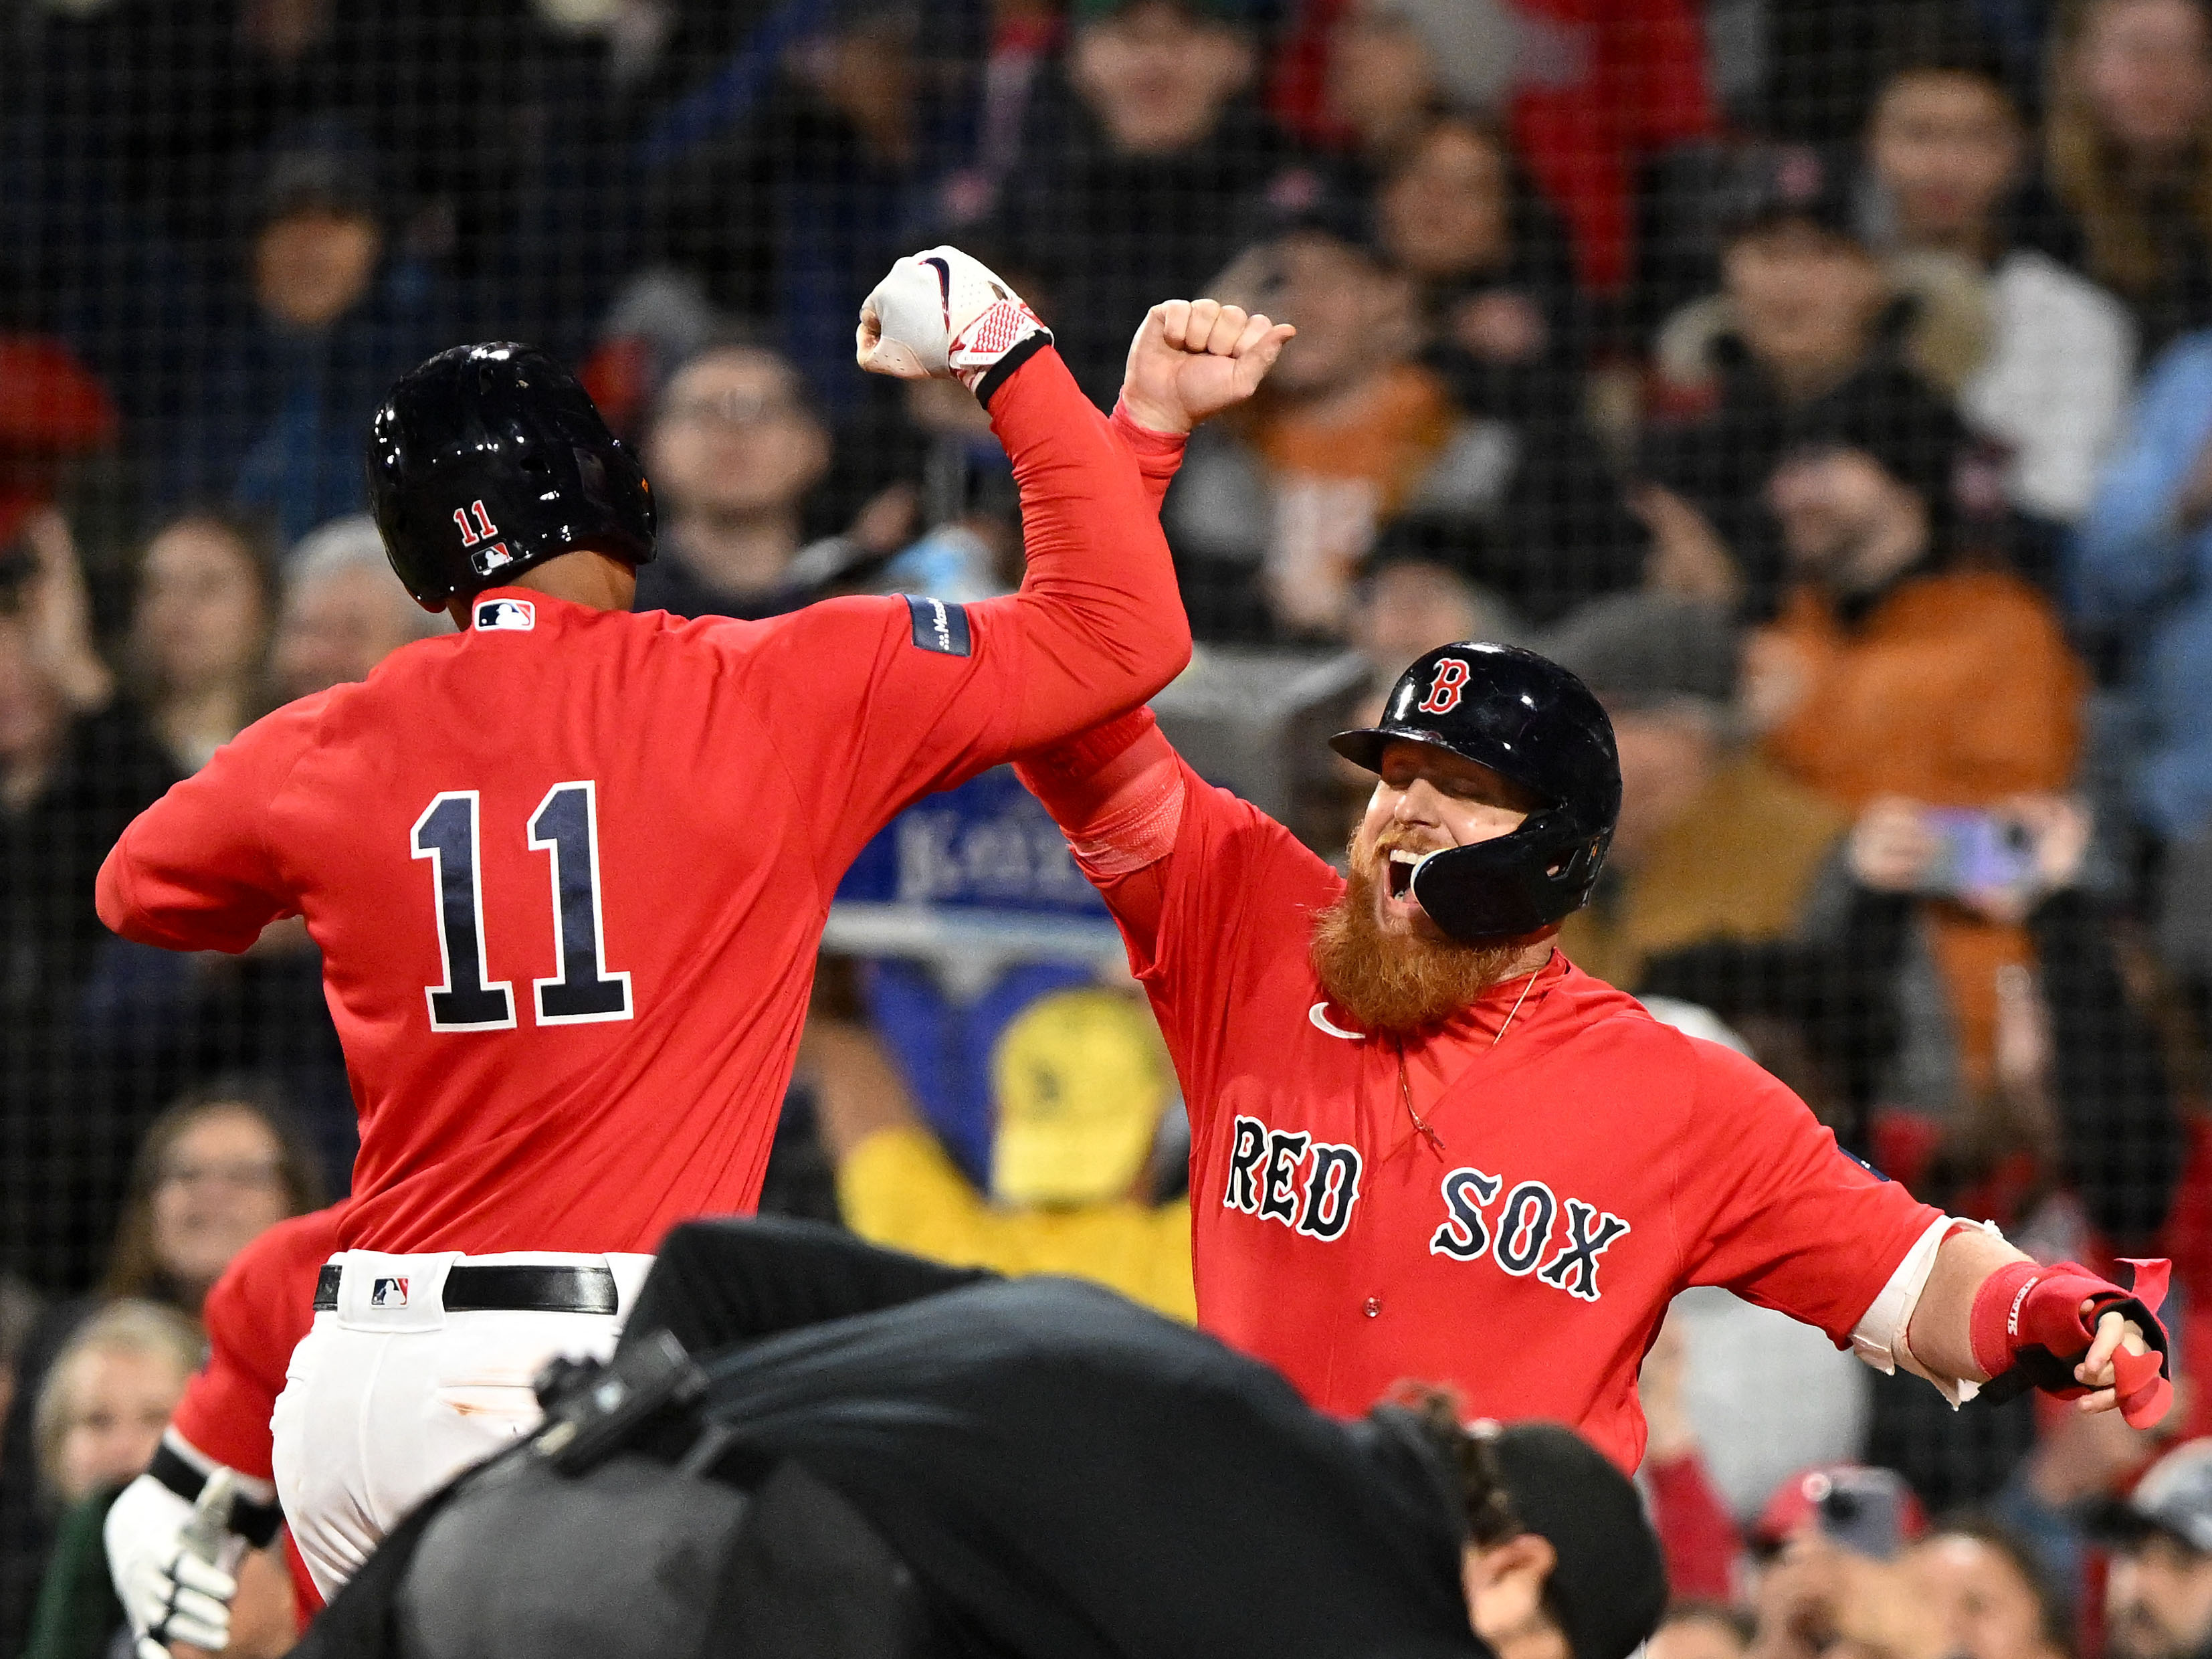 Red Sox bats deliver 11-5 rout for 4-game sweep of Jays